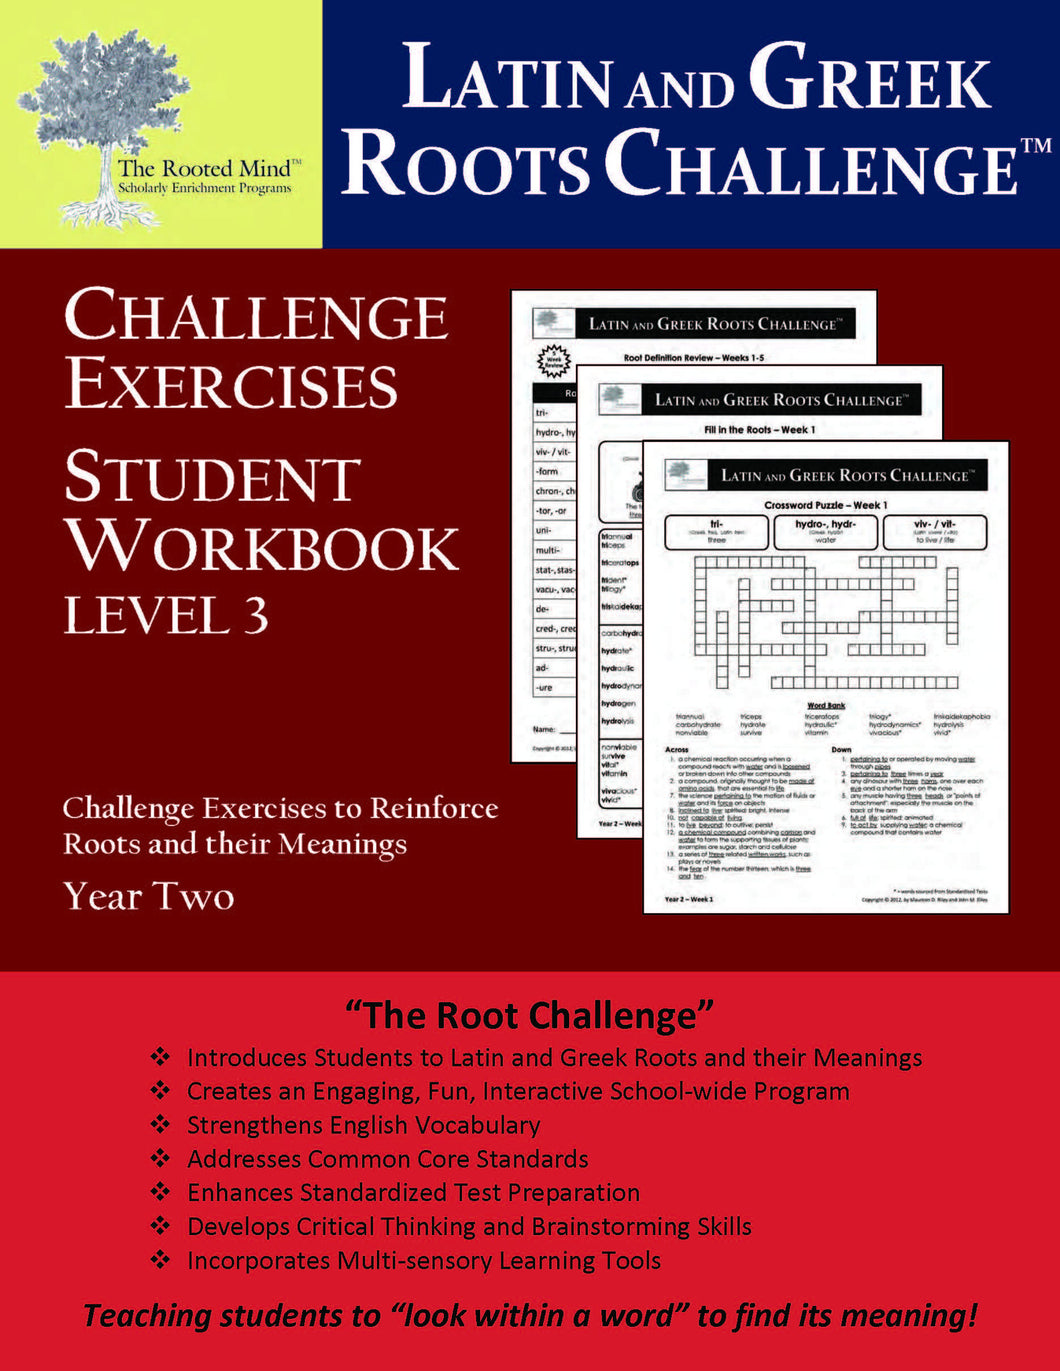 Latin and Greek Roots Challenge - Year 2 - Level 3 Student Workbook